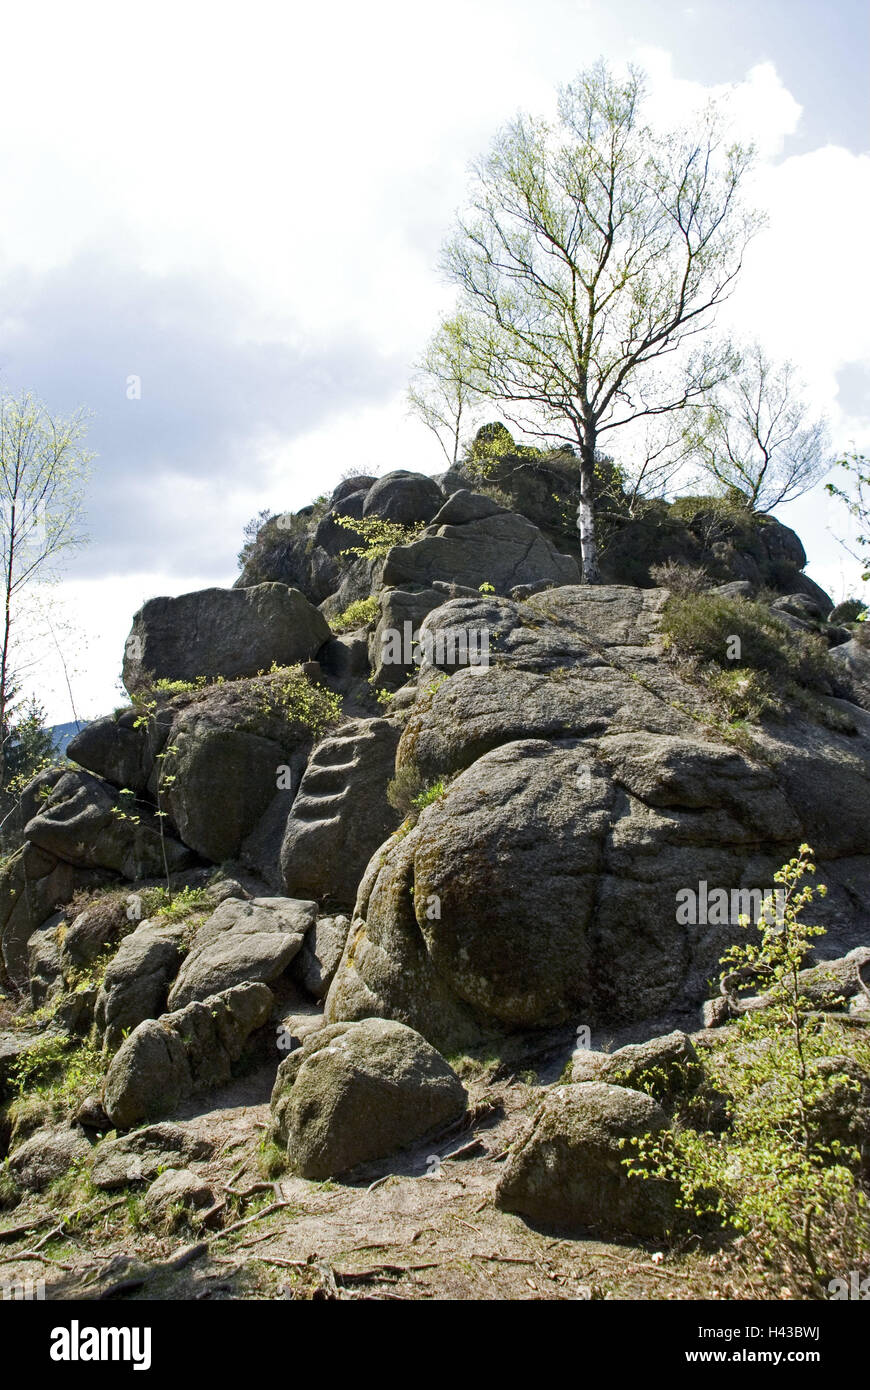 Germany, Lower Saxony, Harz, Okertal, bile formations, scenery, nature, rock, steeply, trees, outside, deserted, Stock Photo